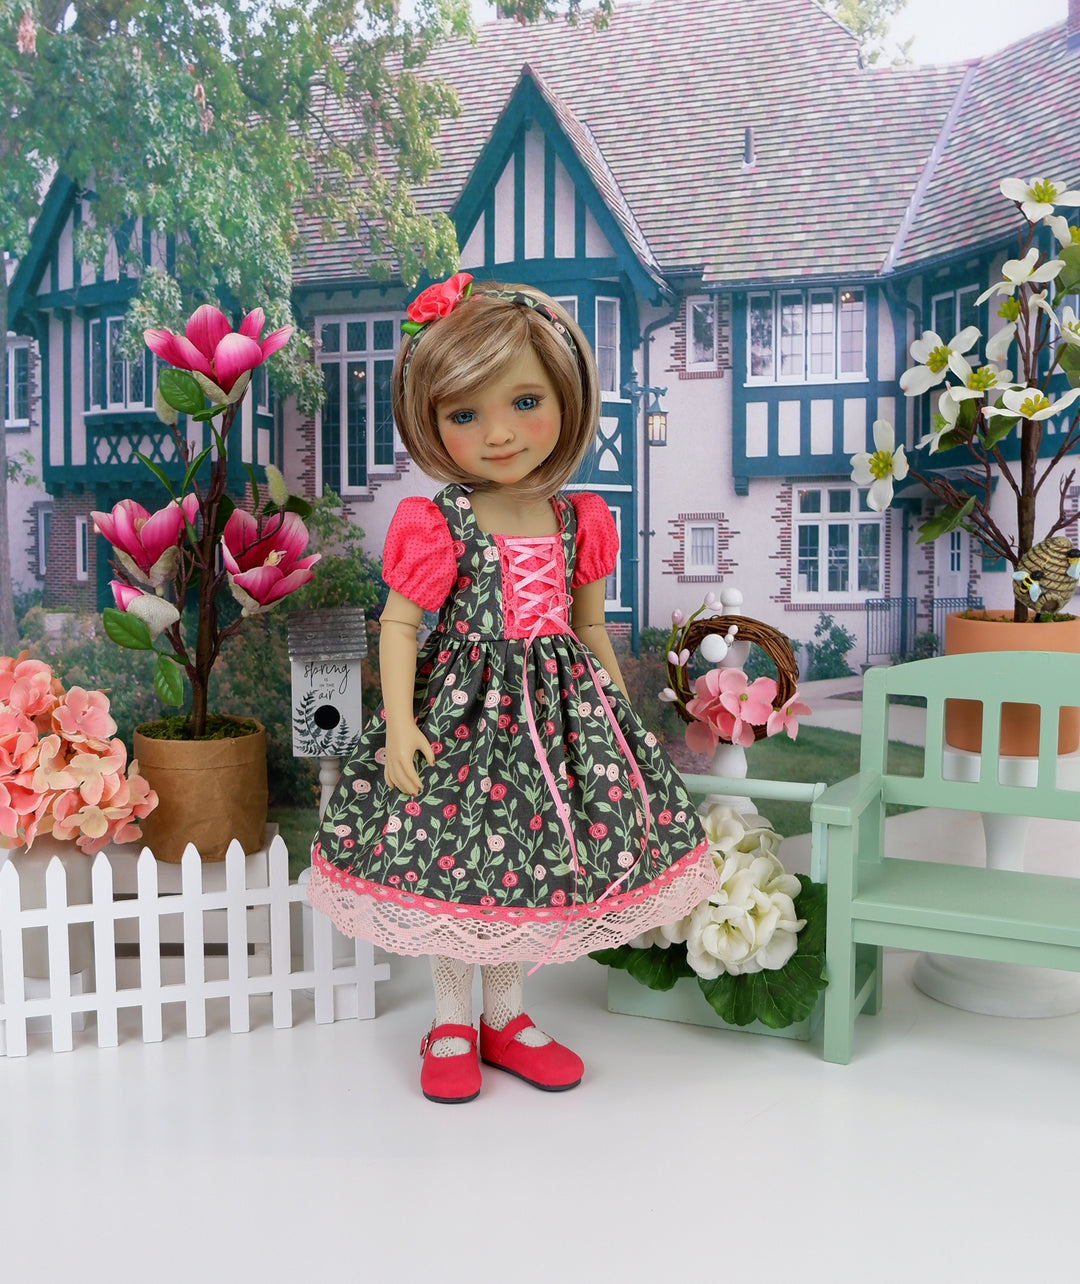 Bavarian Poppies - dress ensemble with shoes for Ruby Red Fashion Friends doll